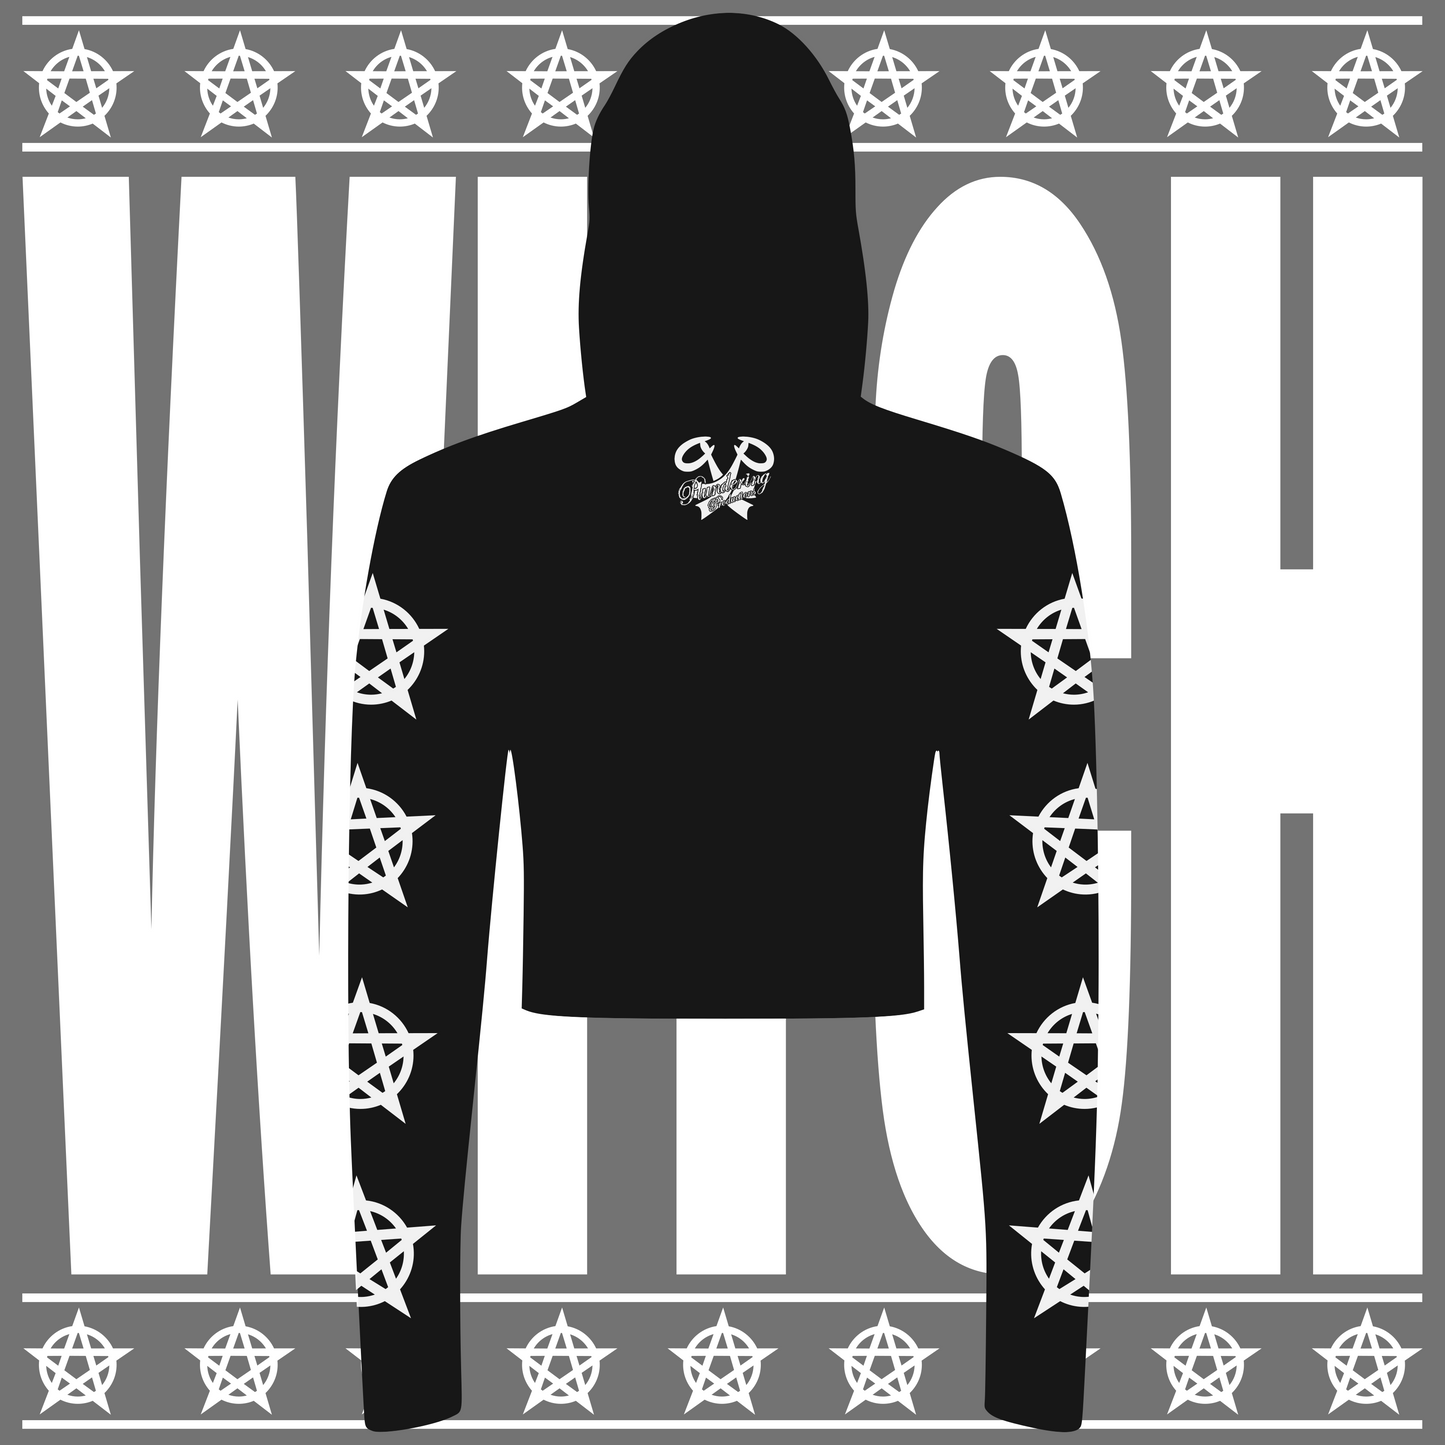 Women's WITCH Cropped Hooded Long Sleeve T-Shirt